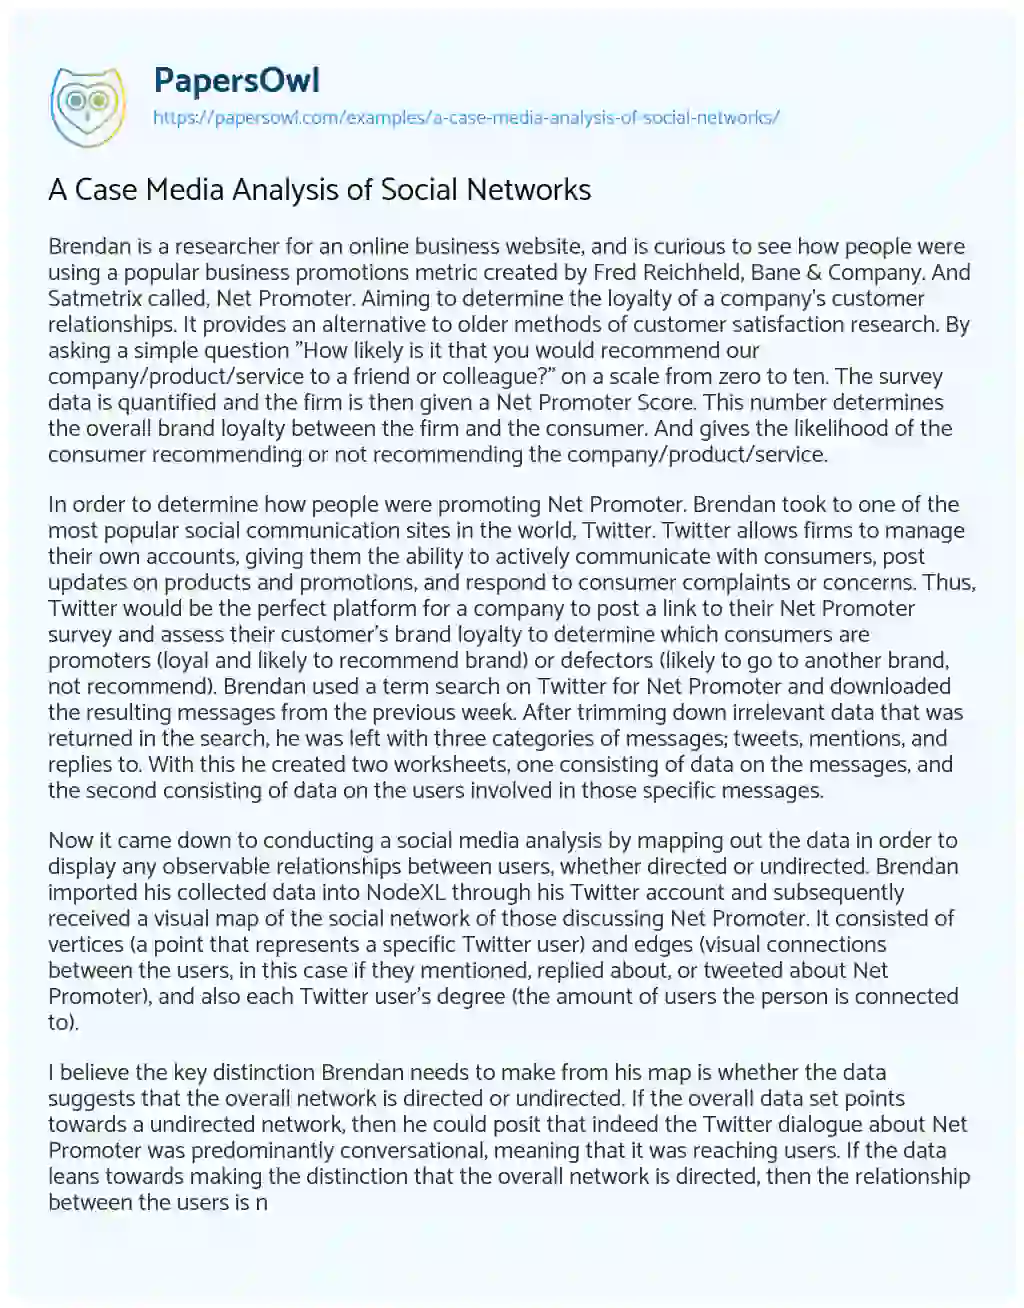 Essay on A Case Media Analysis of Social Networks